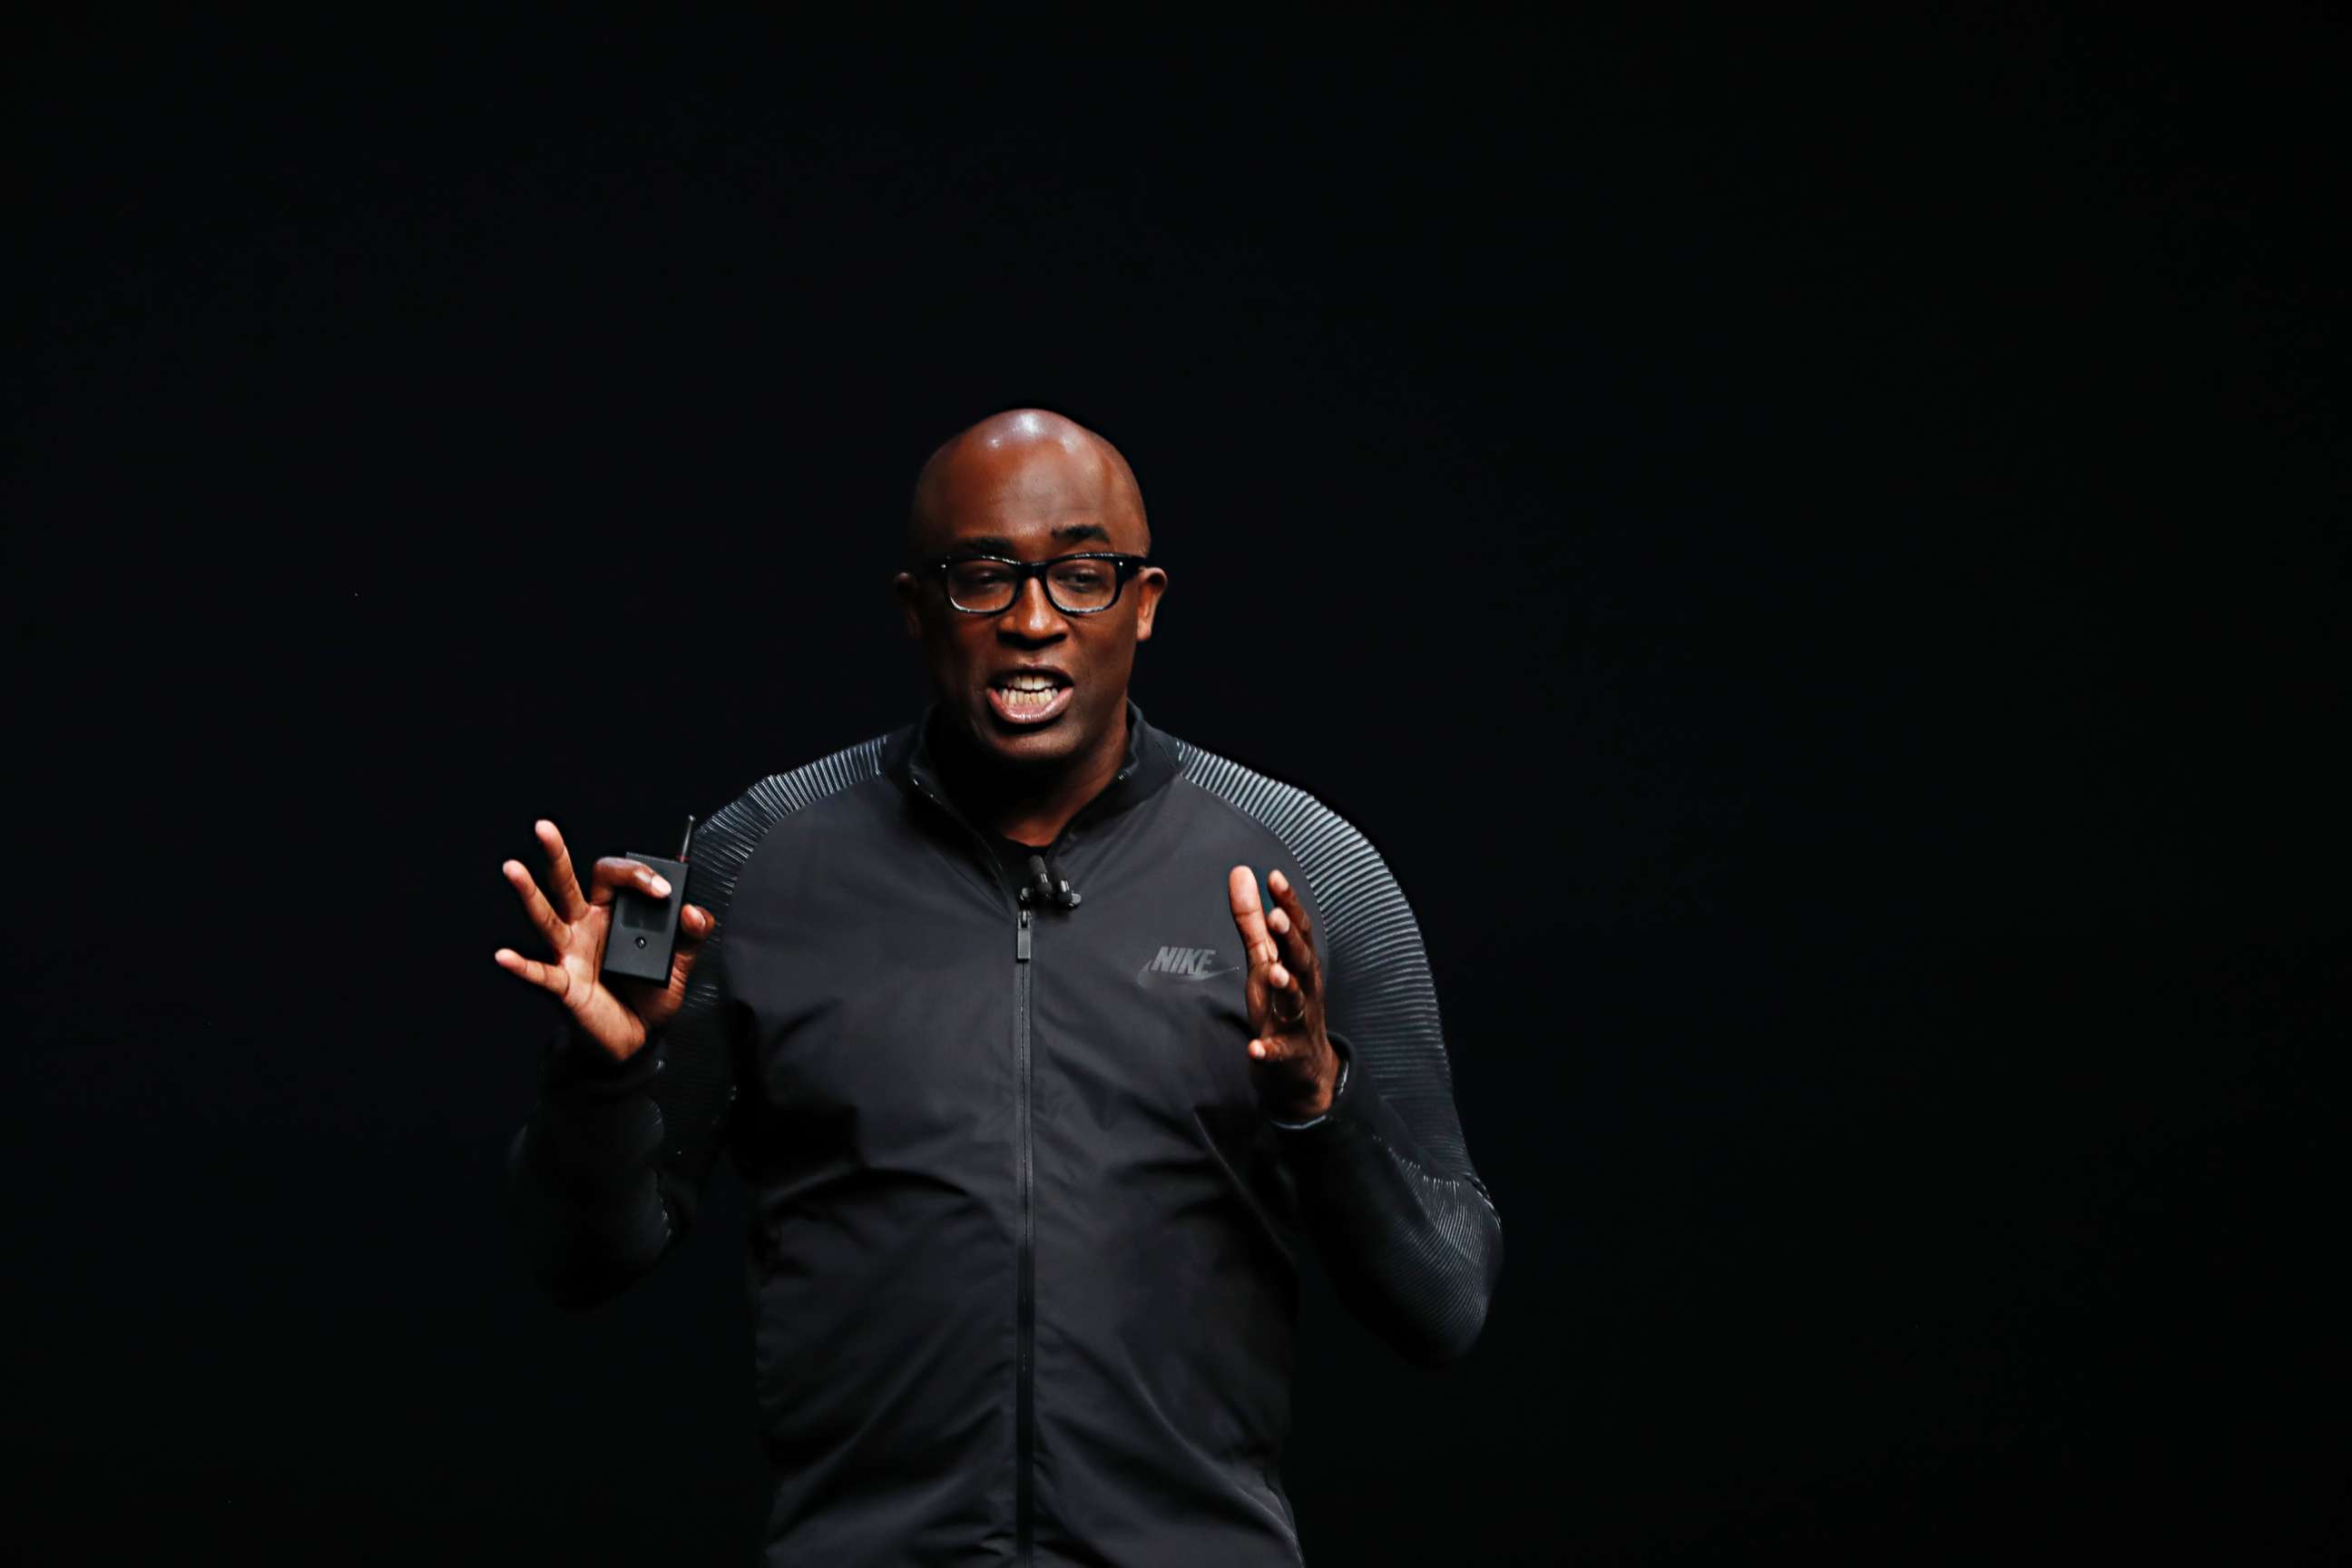 PHOTO: TTrevor Edwards speaks on stage during an Apple launch event on Sept. 7, 2016 in San Francisco. Nike announced on March 15, 2018 that Edwards has resigned as CEO and will retire in August.